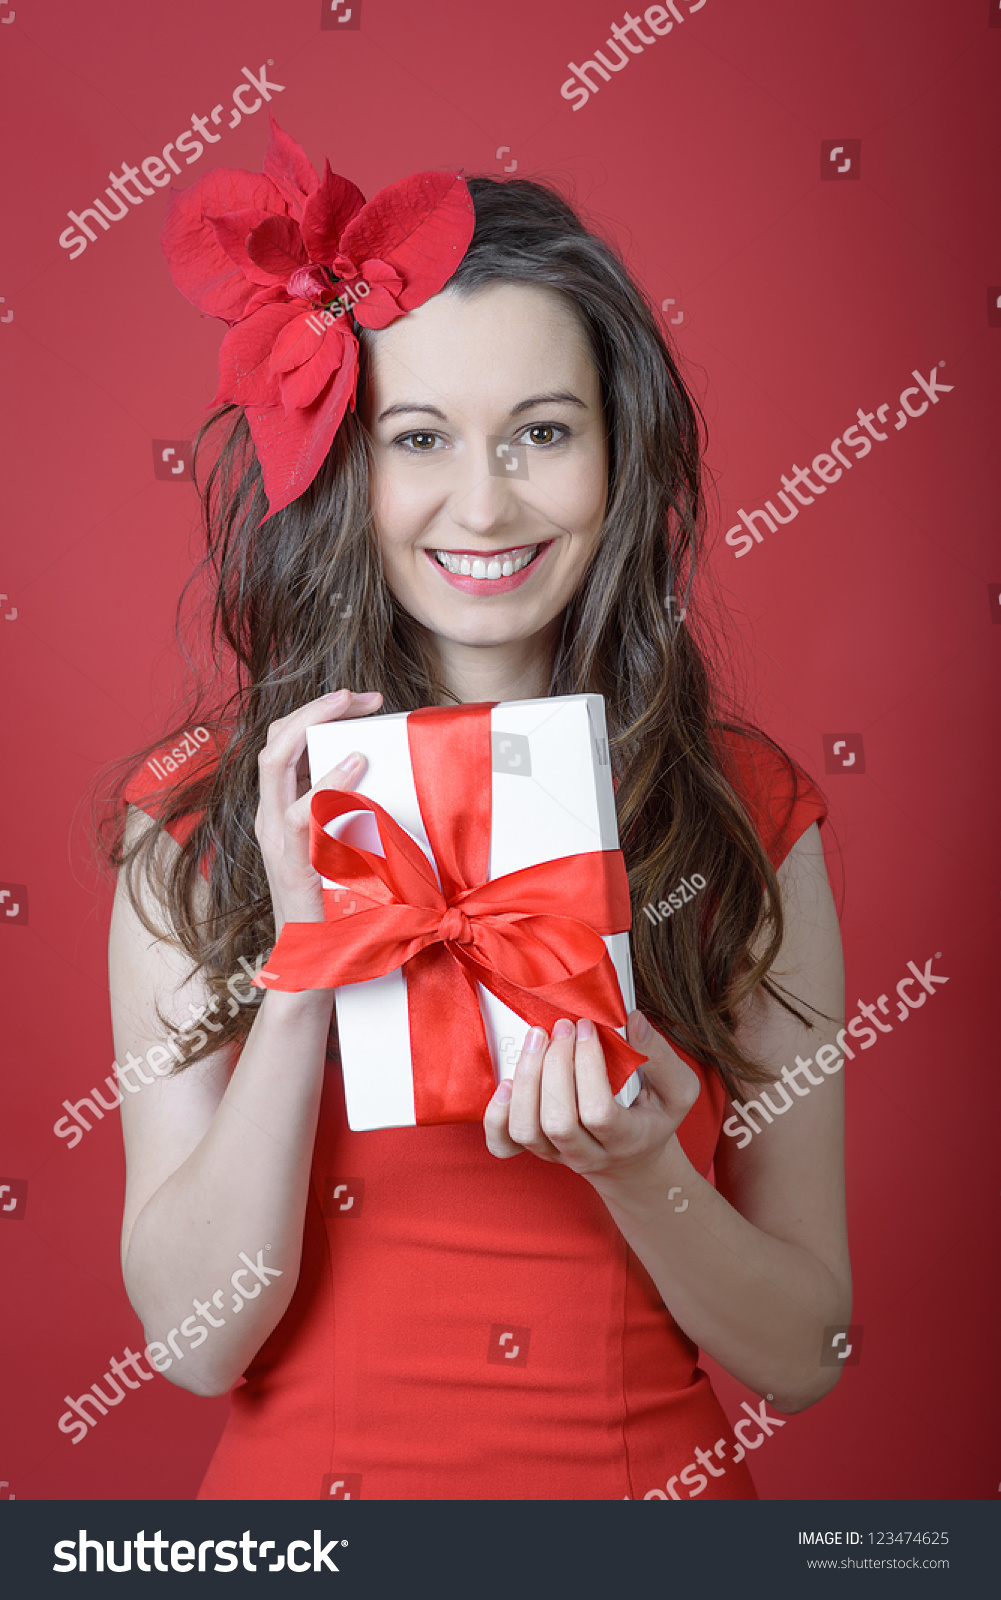 A Woman Holding A Gift Box In A Gesture Of Giving. Stock Photo ...